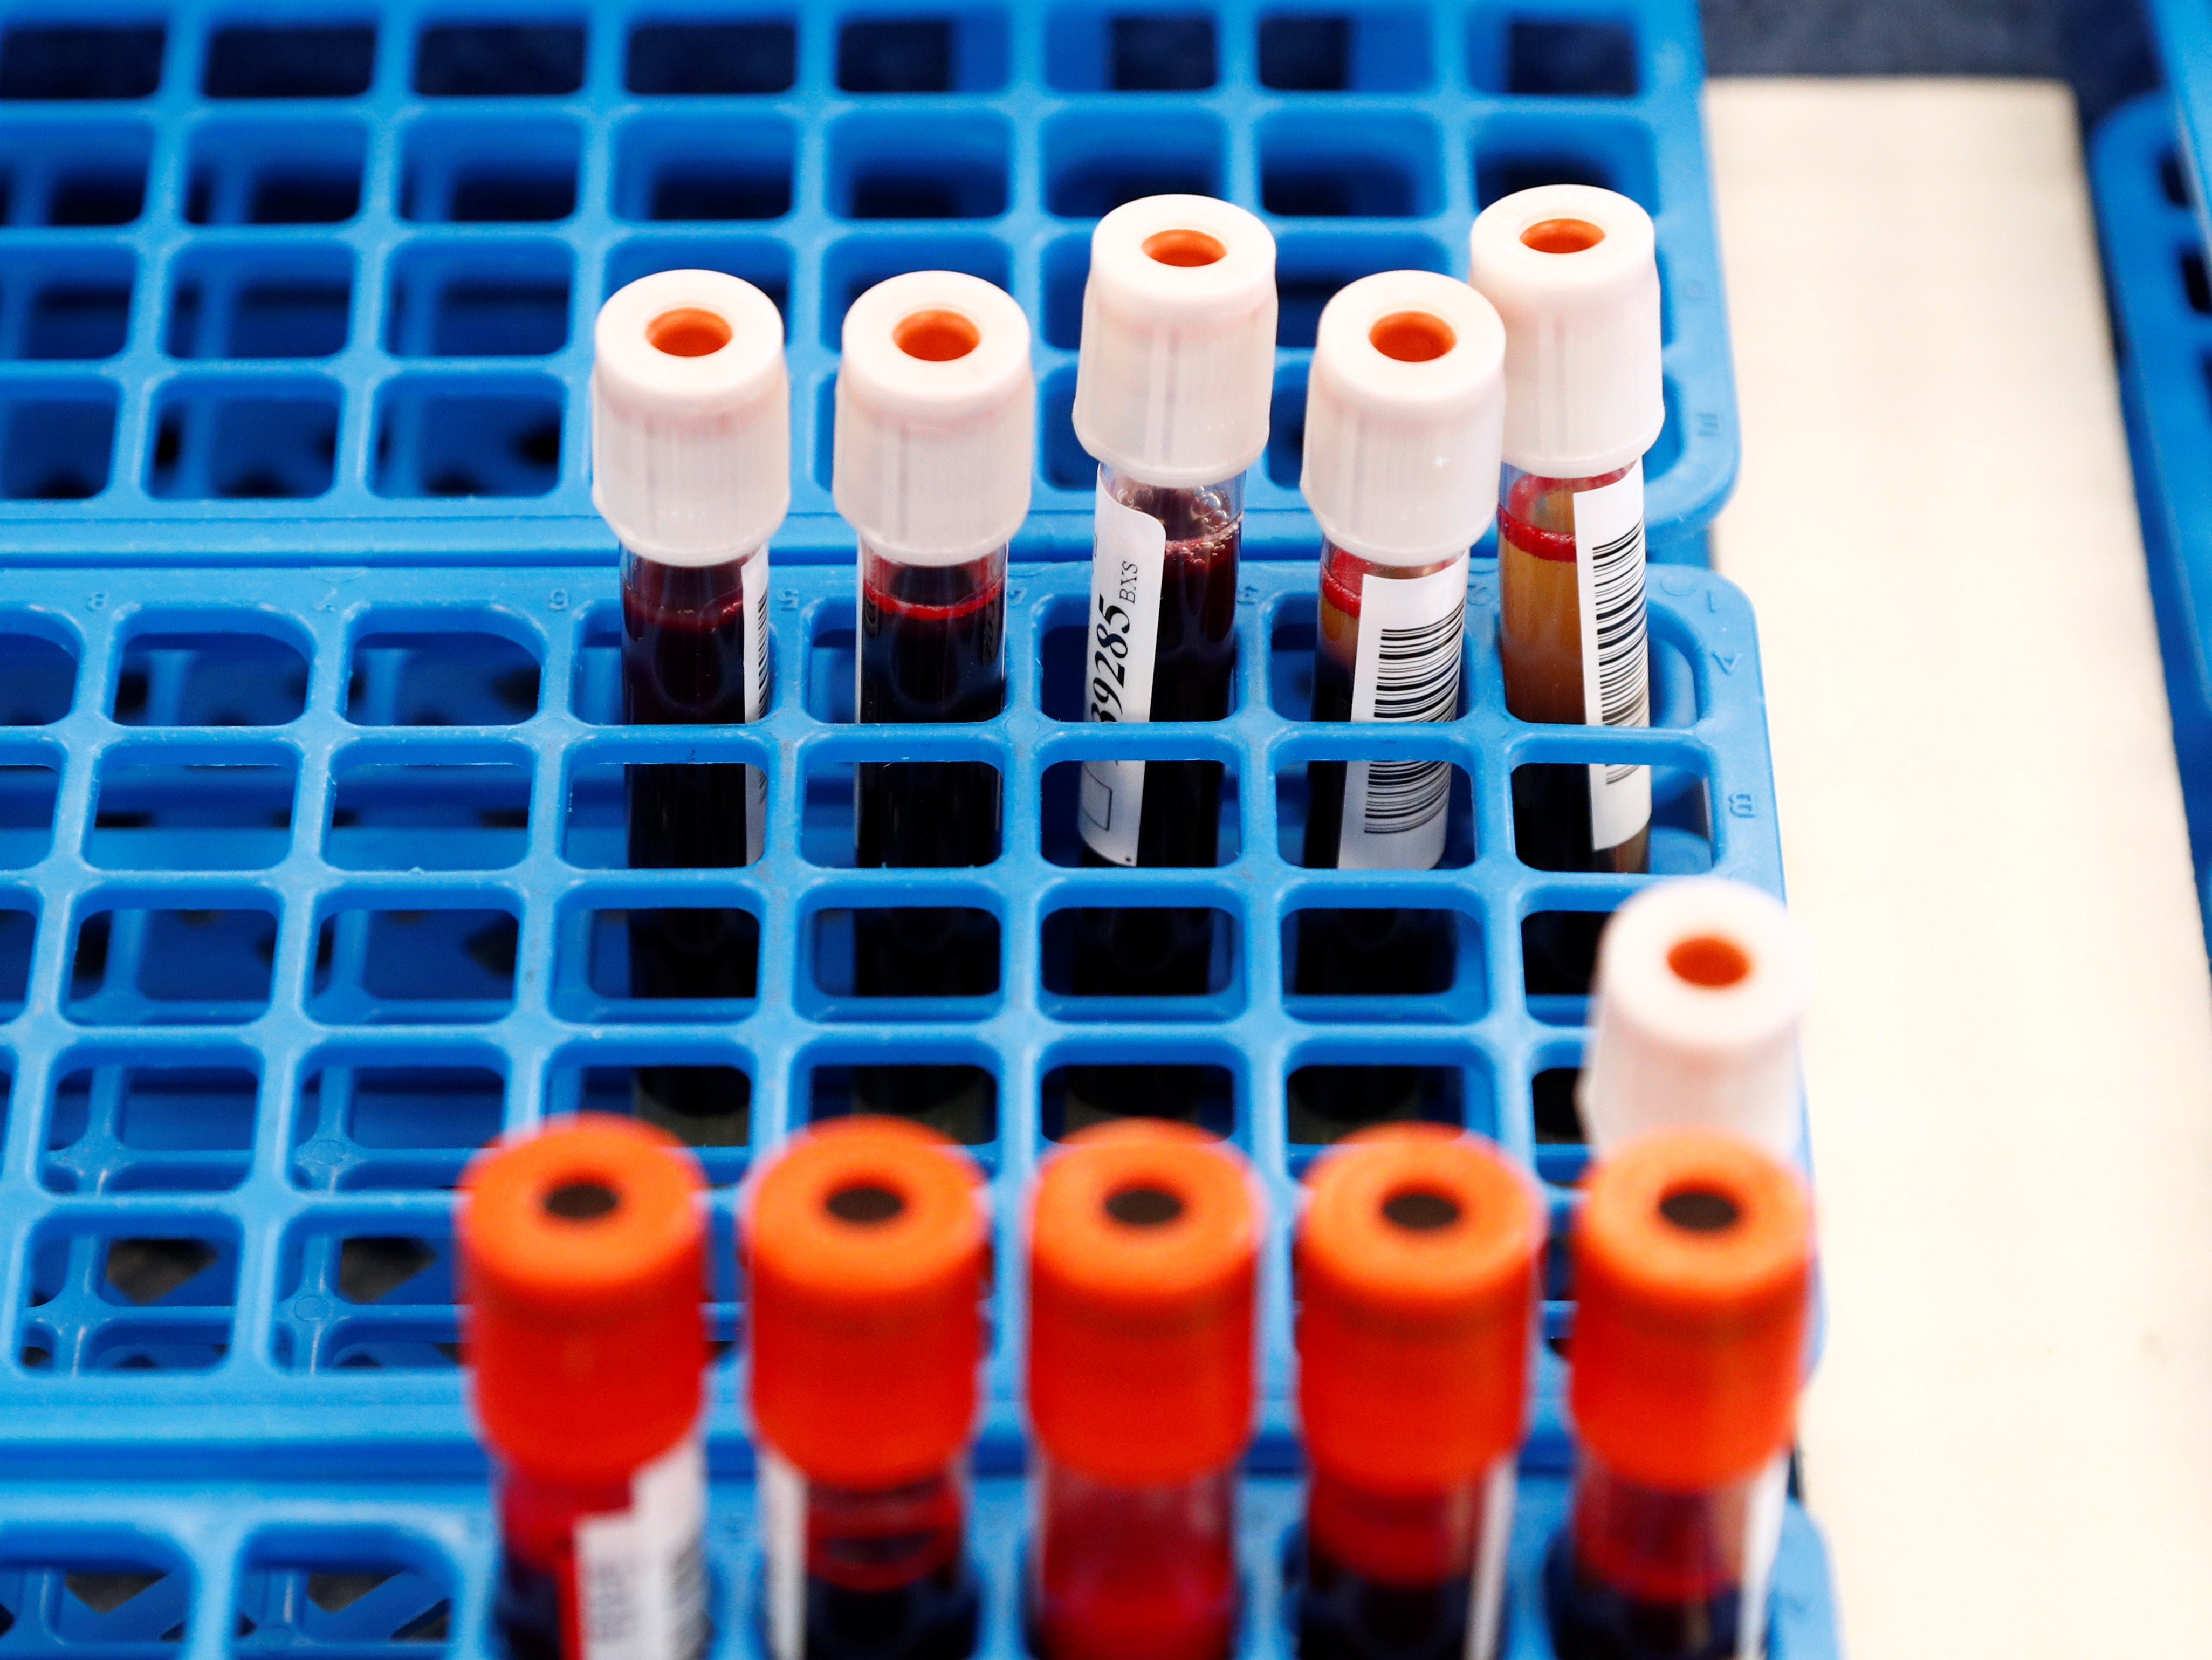 Tubes with blood samples are seen at the Belgian Red Cross blood collection centre during the coronavirus pandemic